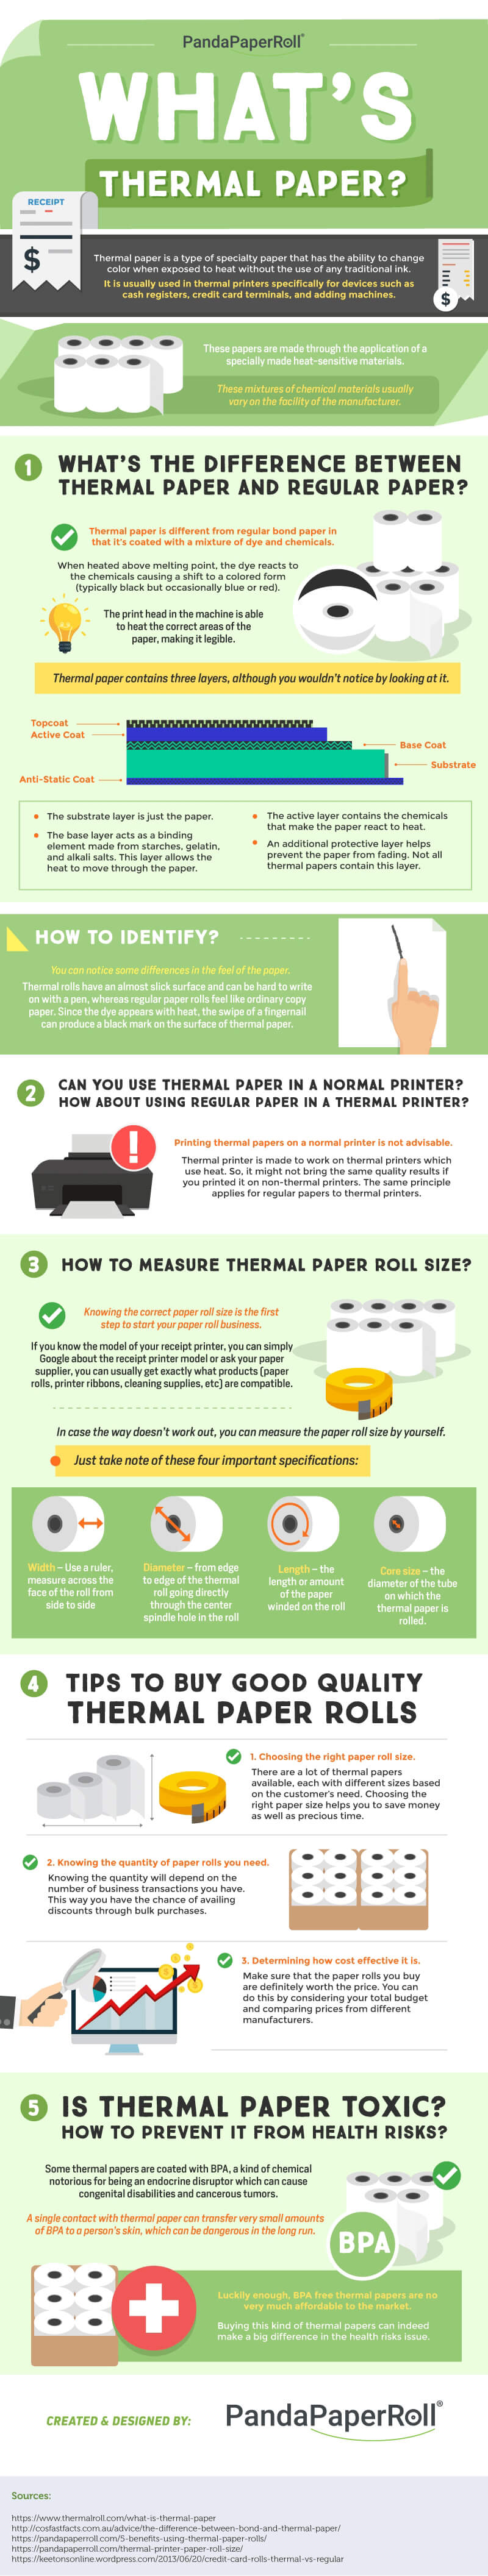 Thermal Paper: Everything You Should Know About It